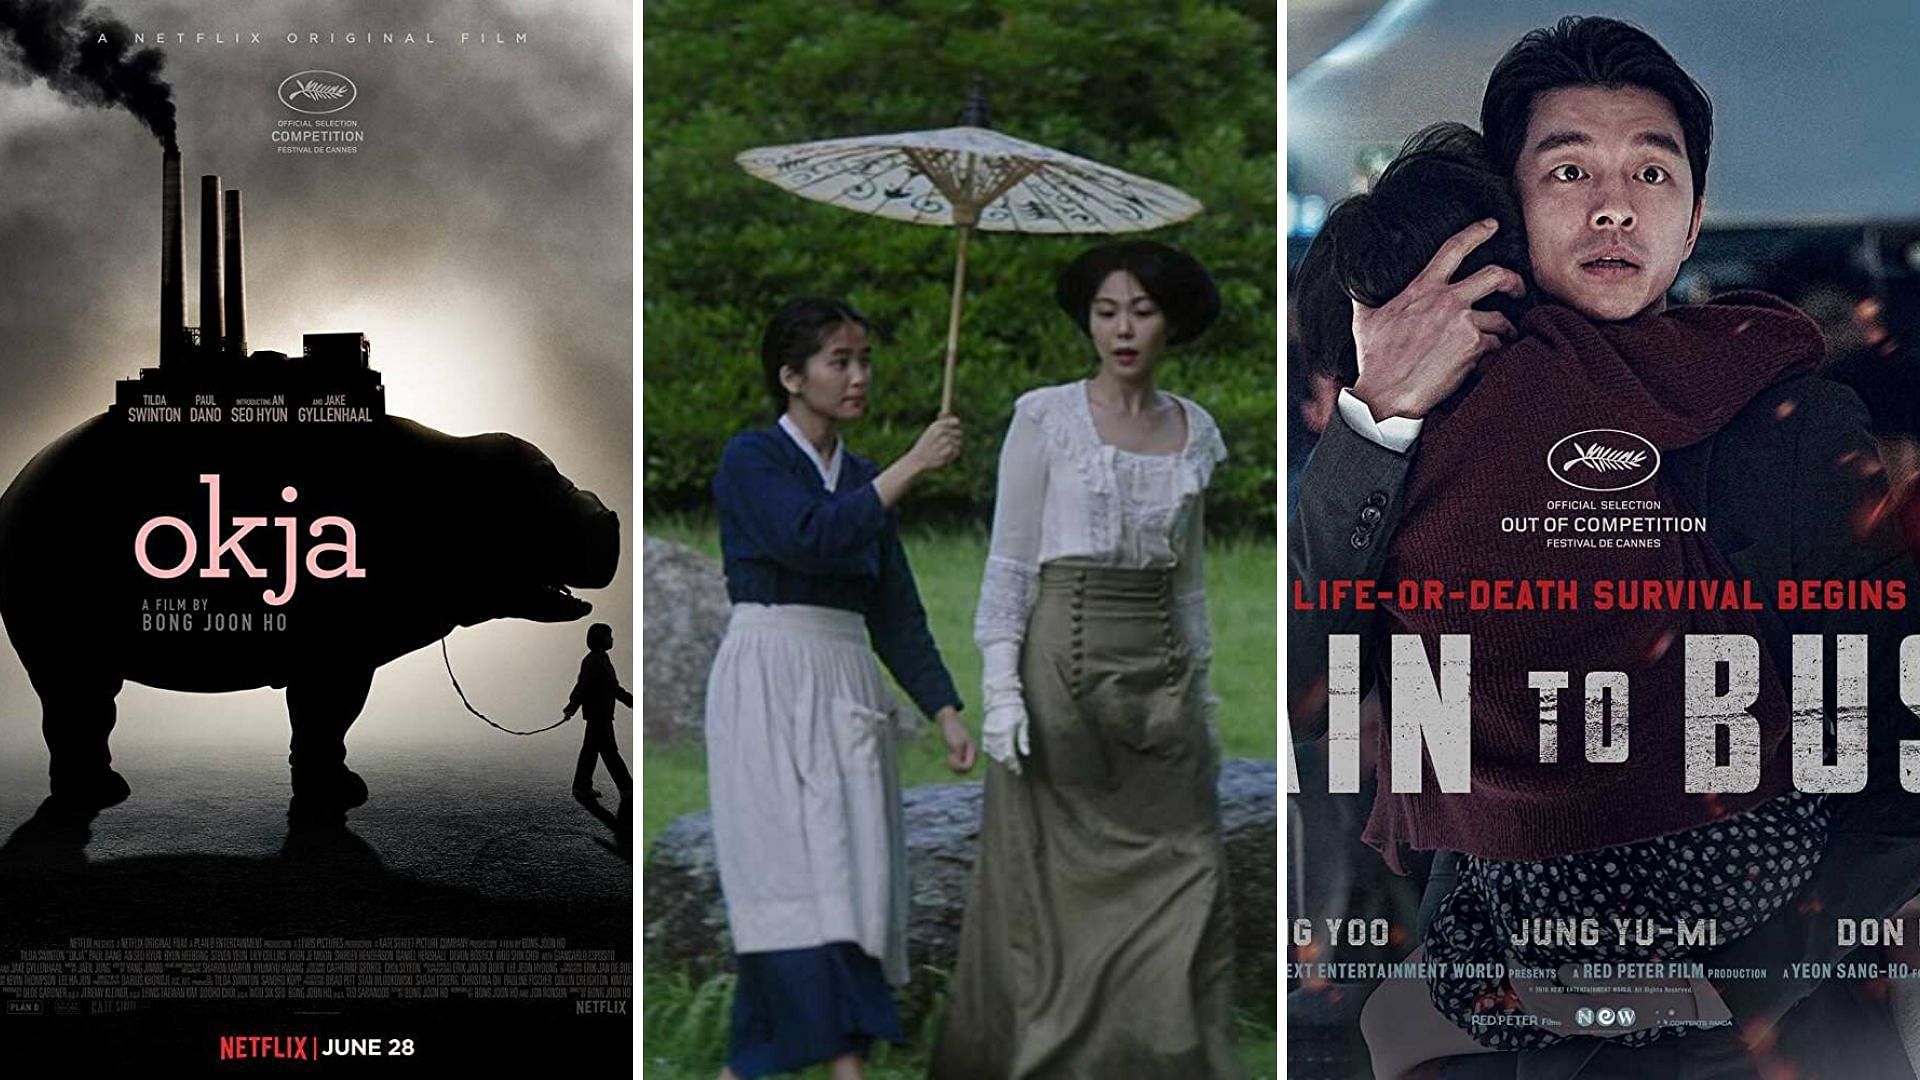 After OscarWinning Film Parasite, Here Are 10 MustWatch South Korean